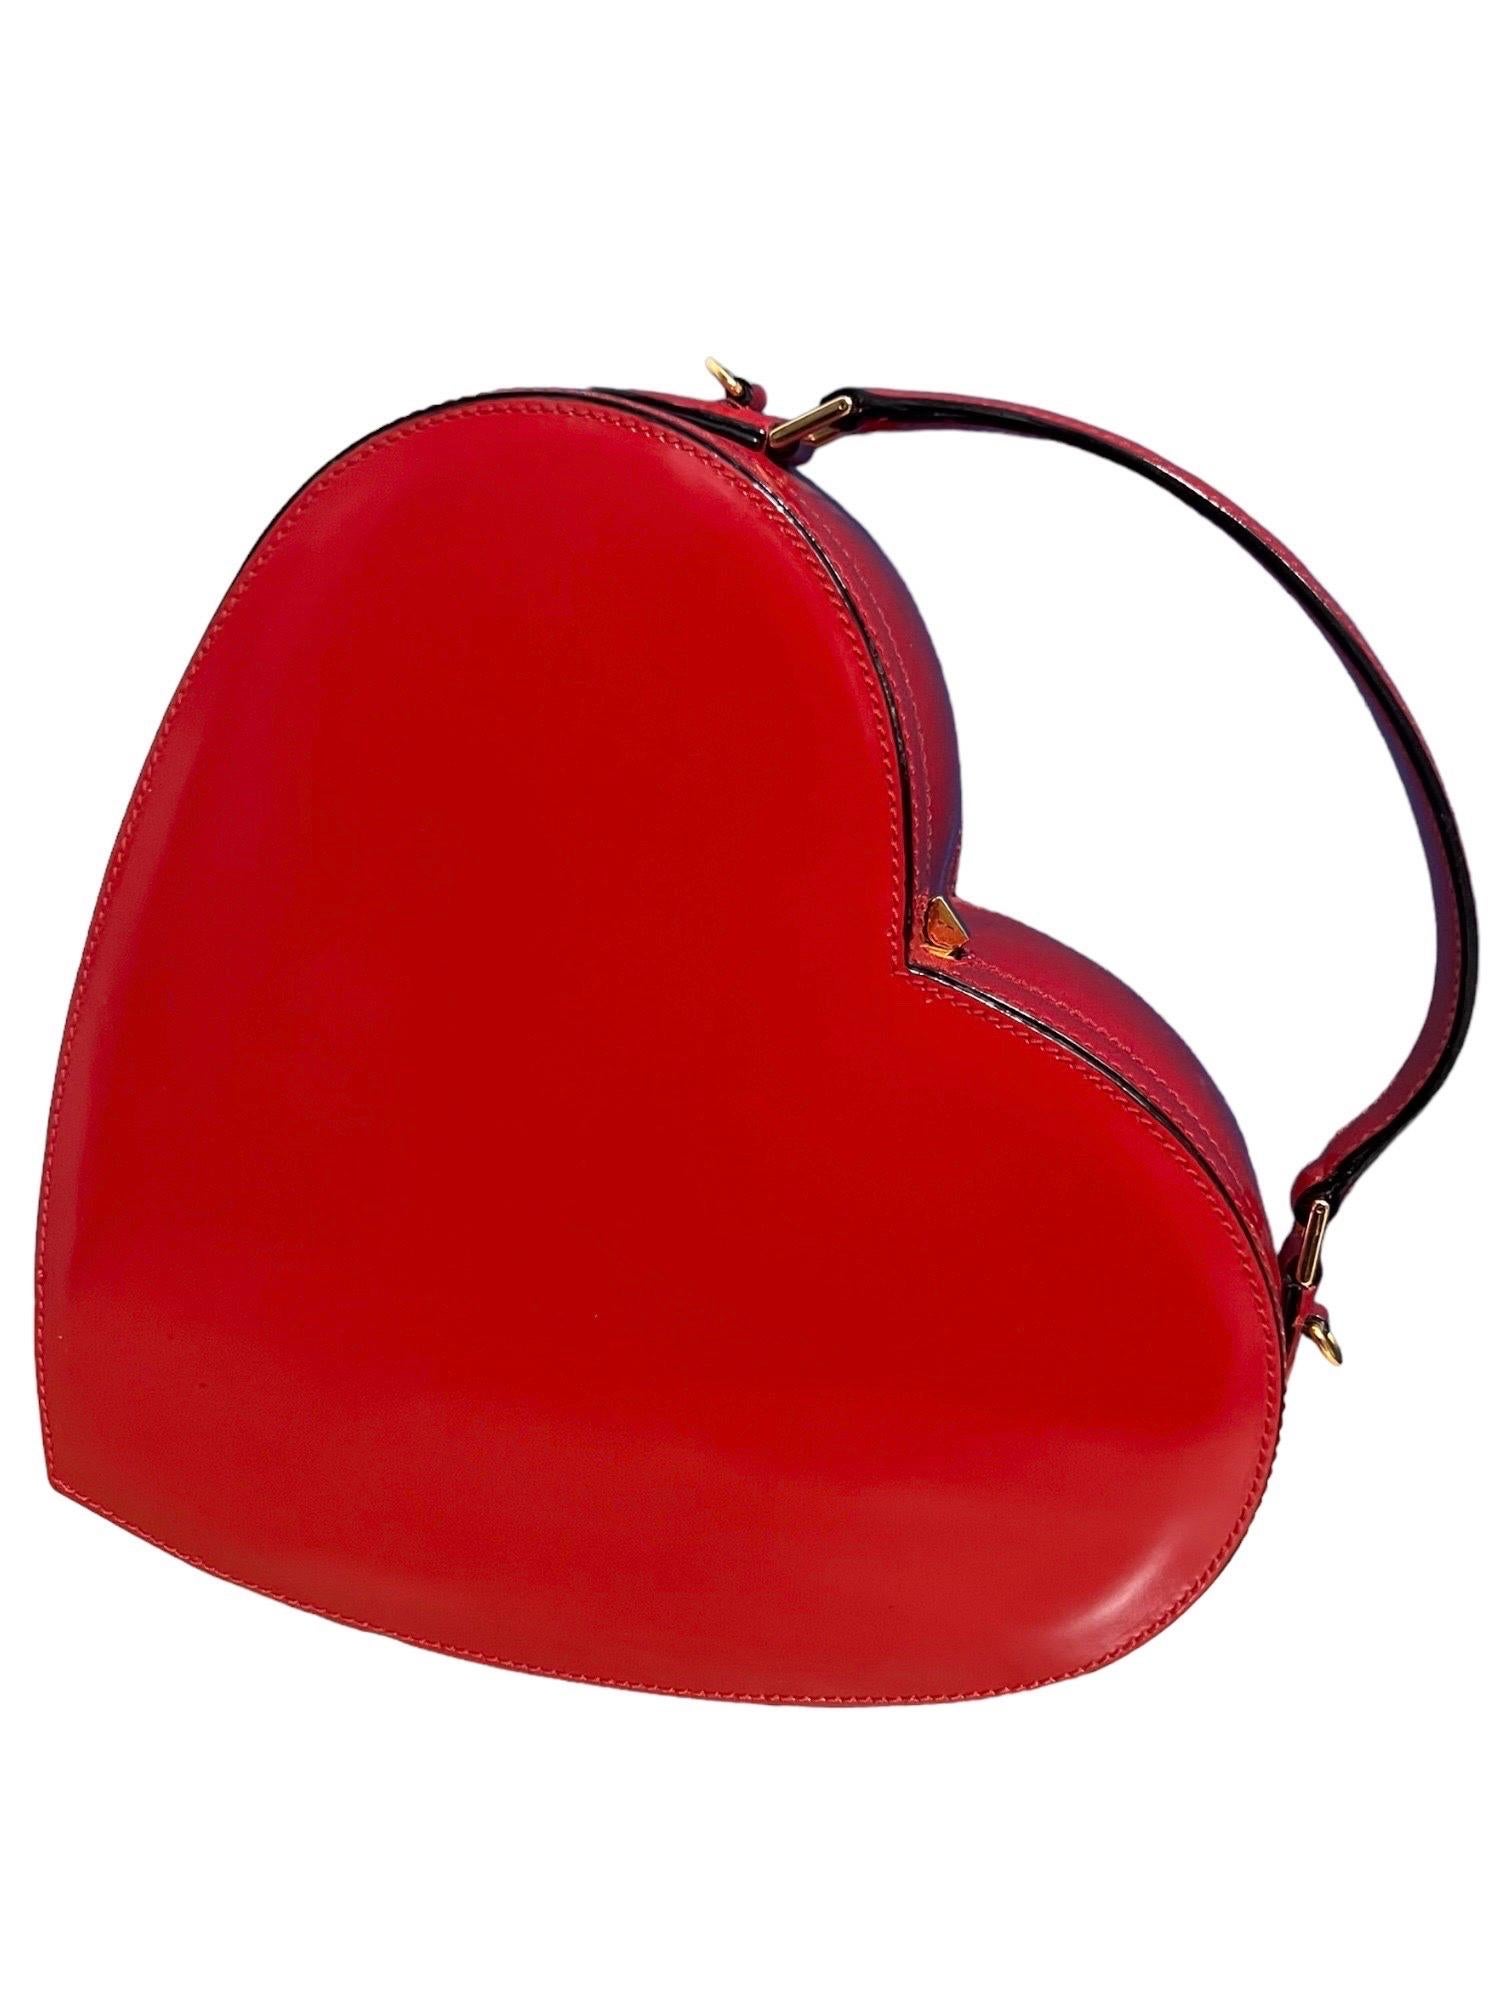 Moschino Vintage Red Leather Heart Bag The Nanny 6